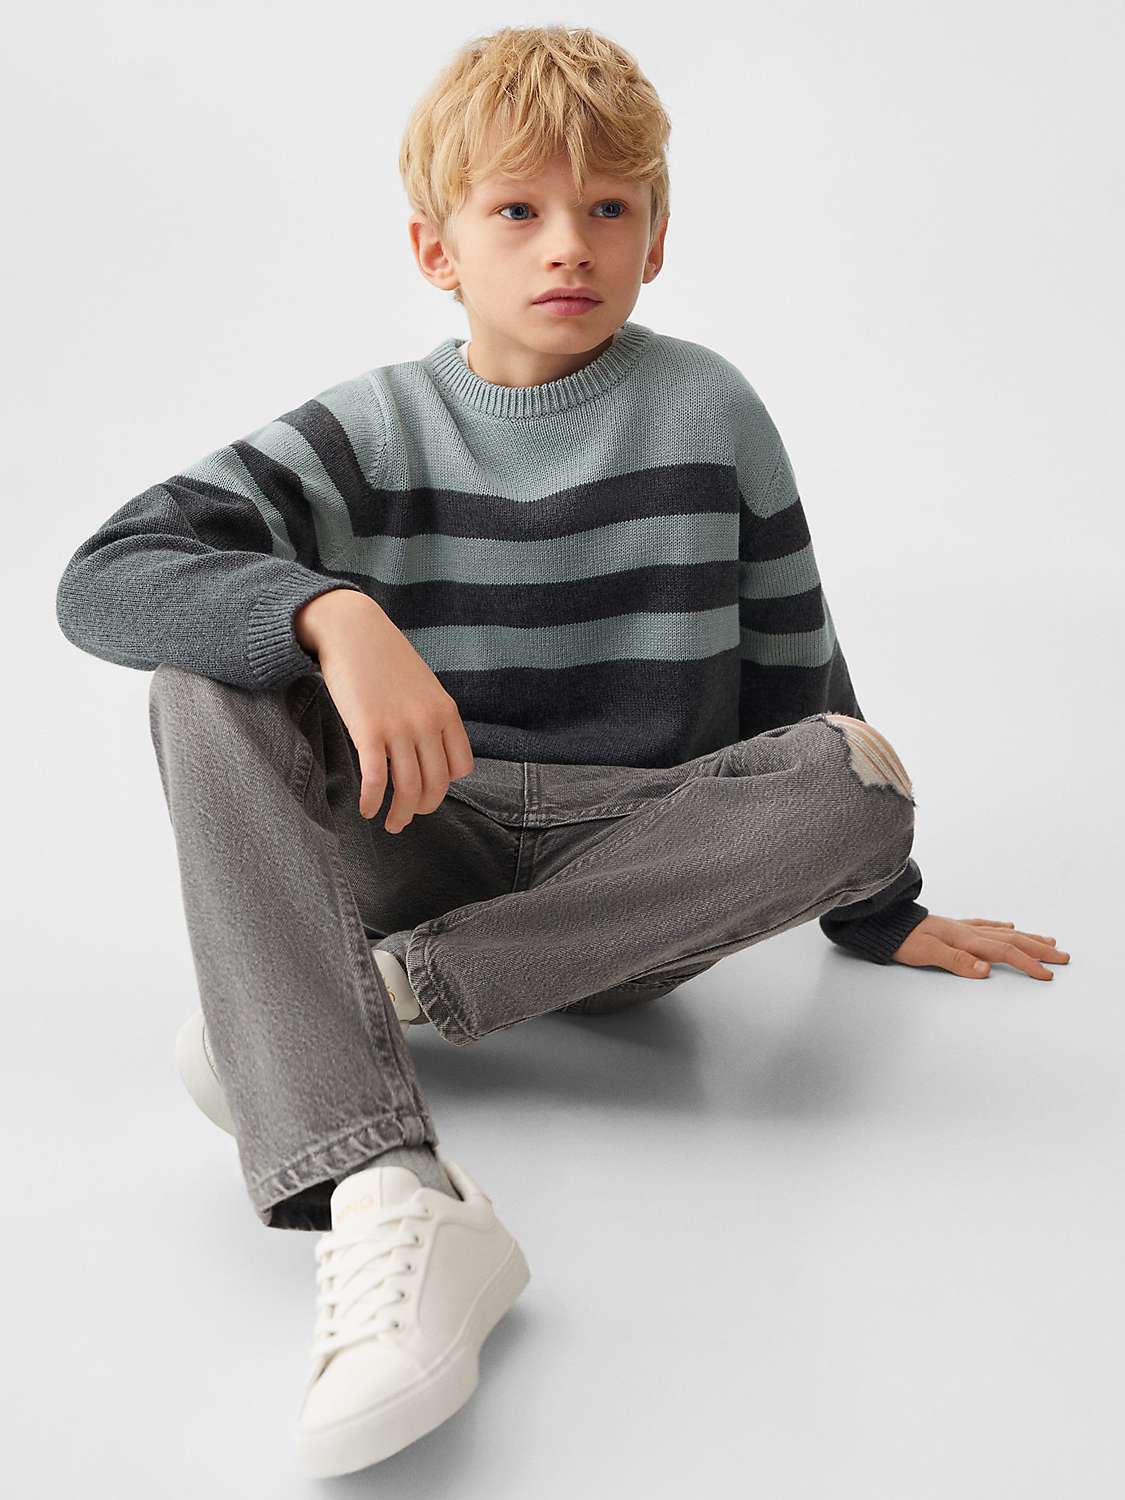 Buy Mango Kids' Dad Decorative Ripped Jeans, Open Grey Online at johnlewis.com